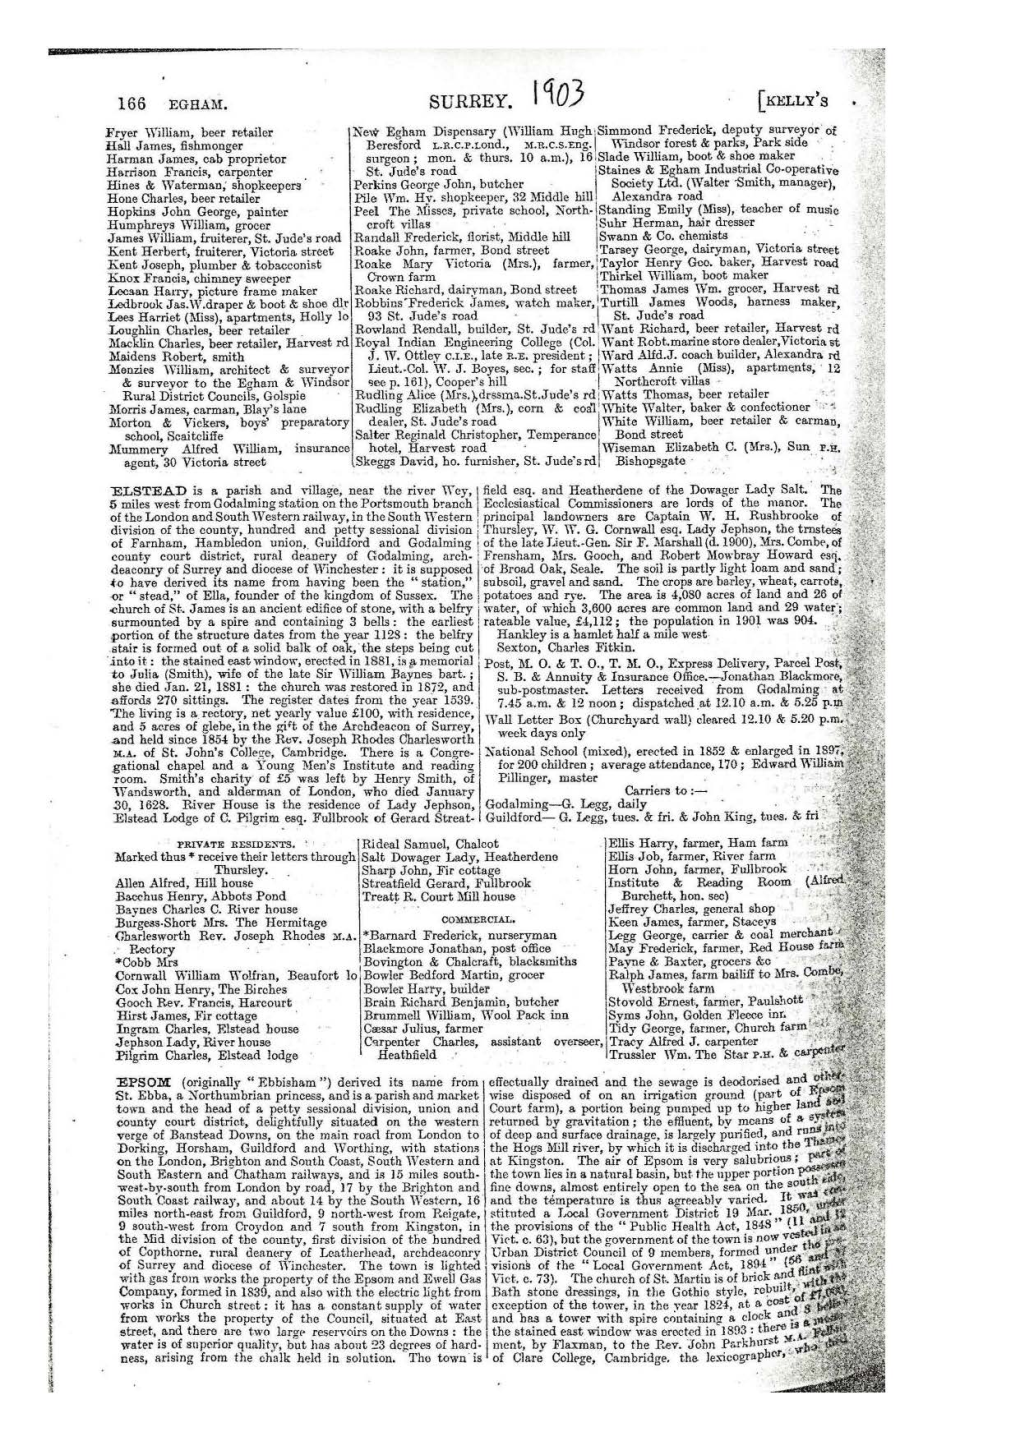 Kelly's Directory 1903